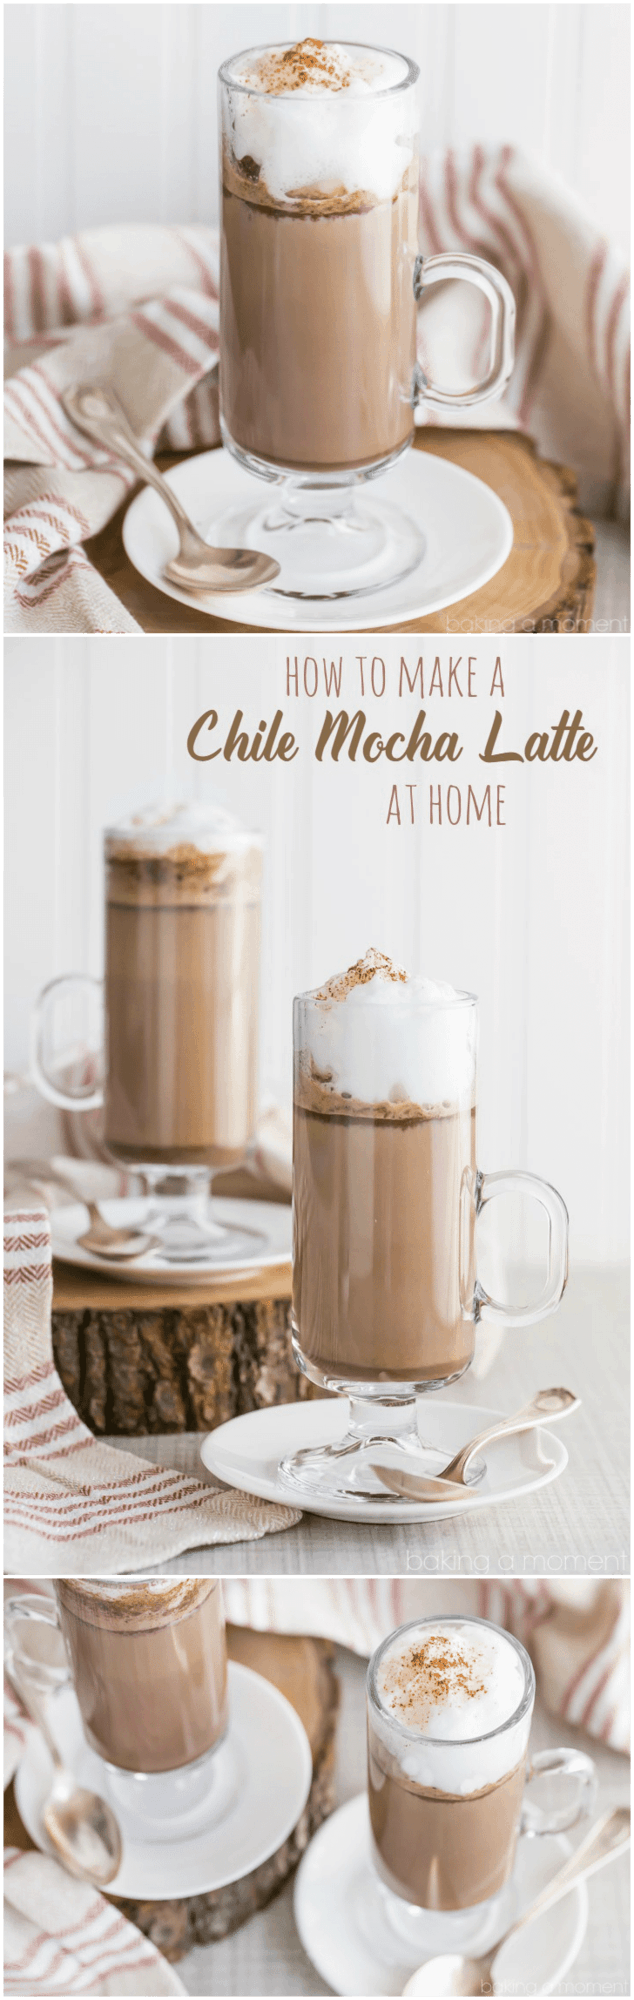 How to Make a Chile Mocha Latte at Home- this tastes exactly like the Starbuck's version!